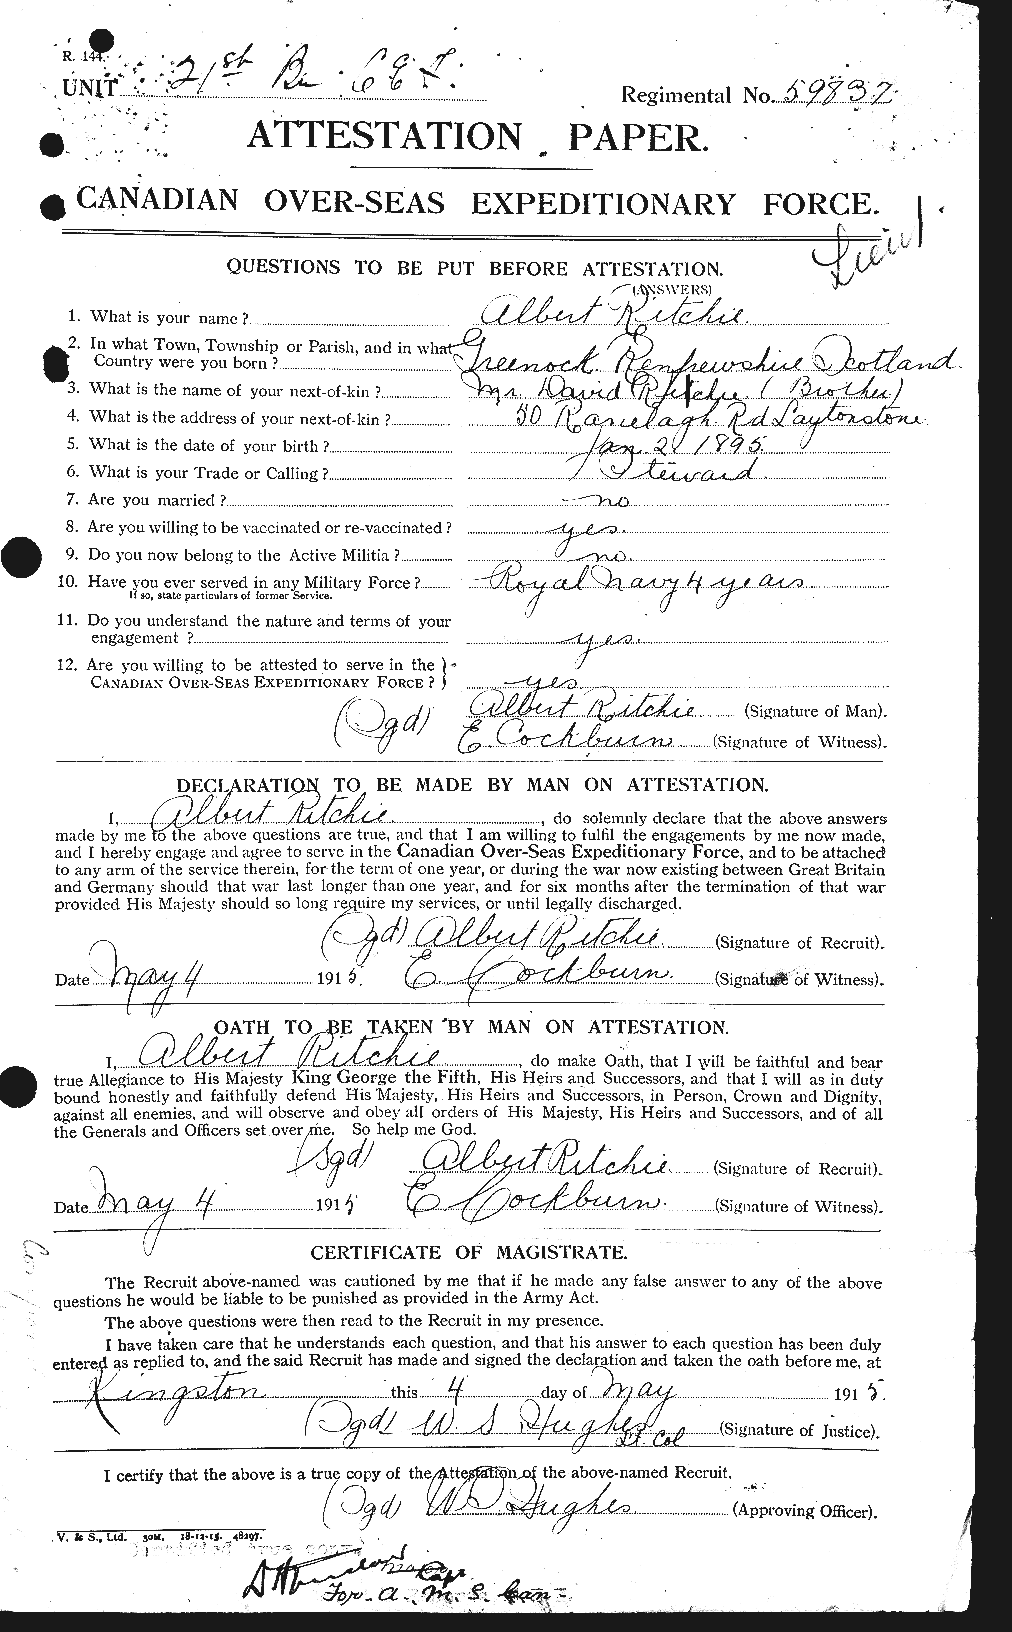 Personnel Records of the First World War - CEF 601411a